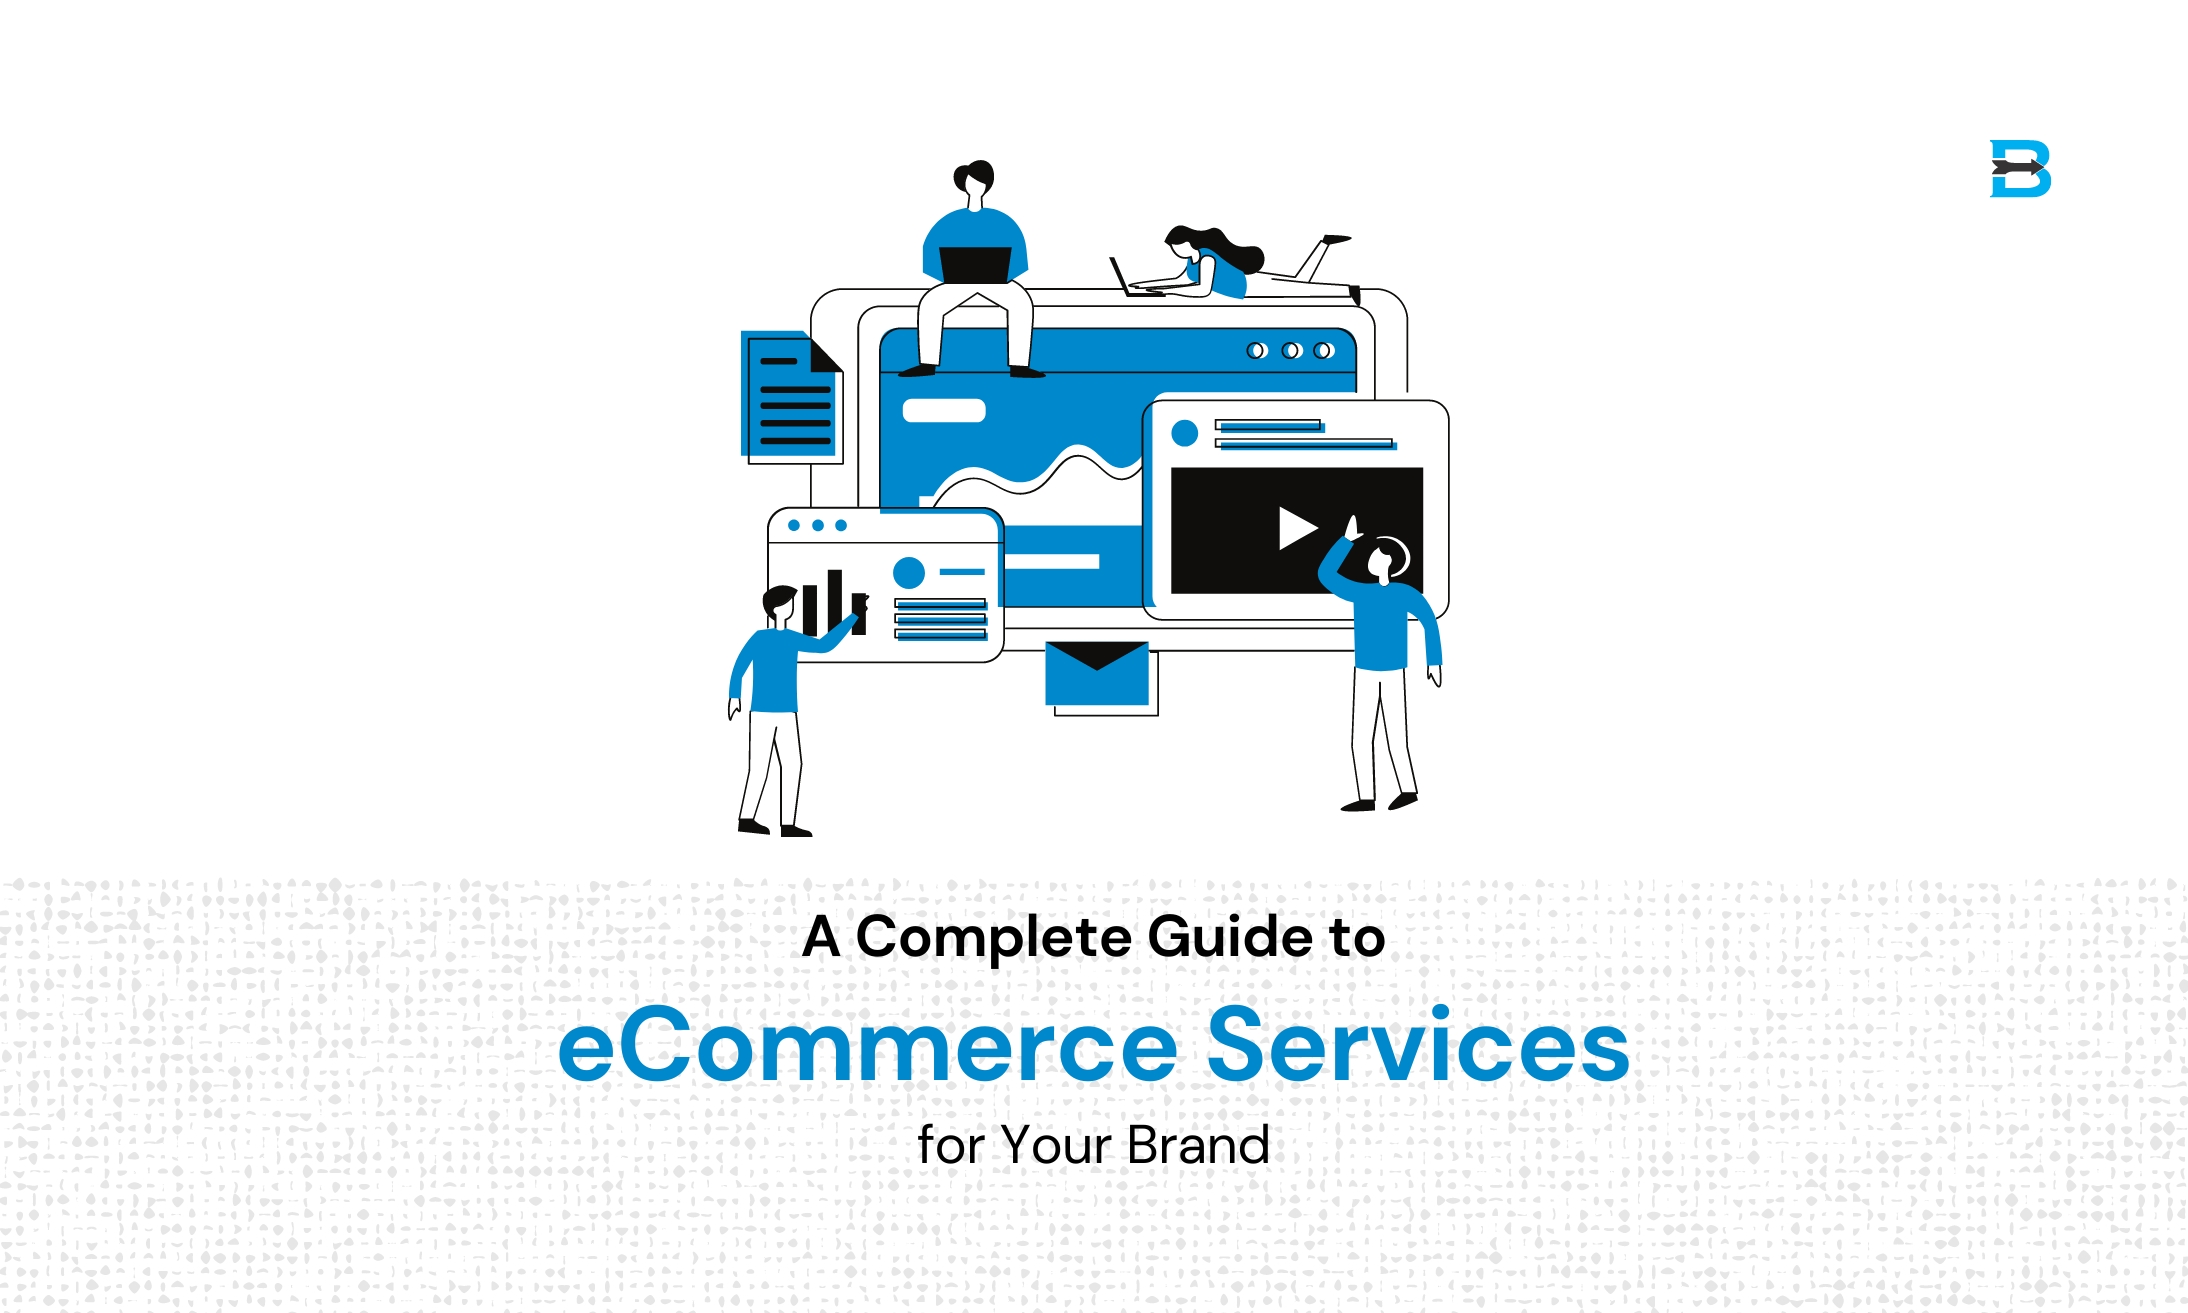 A Complete Guide to eCommerce Services for Your Brand